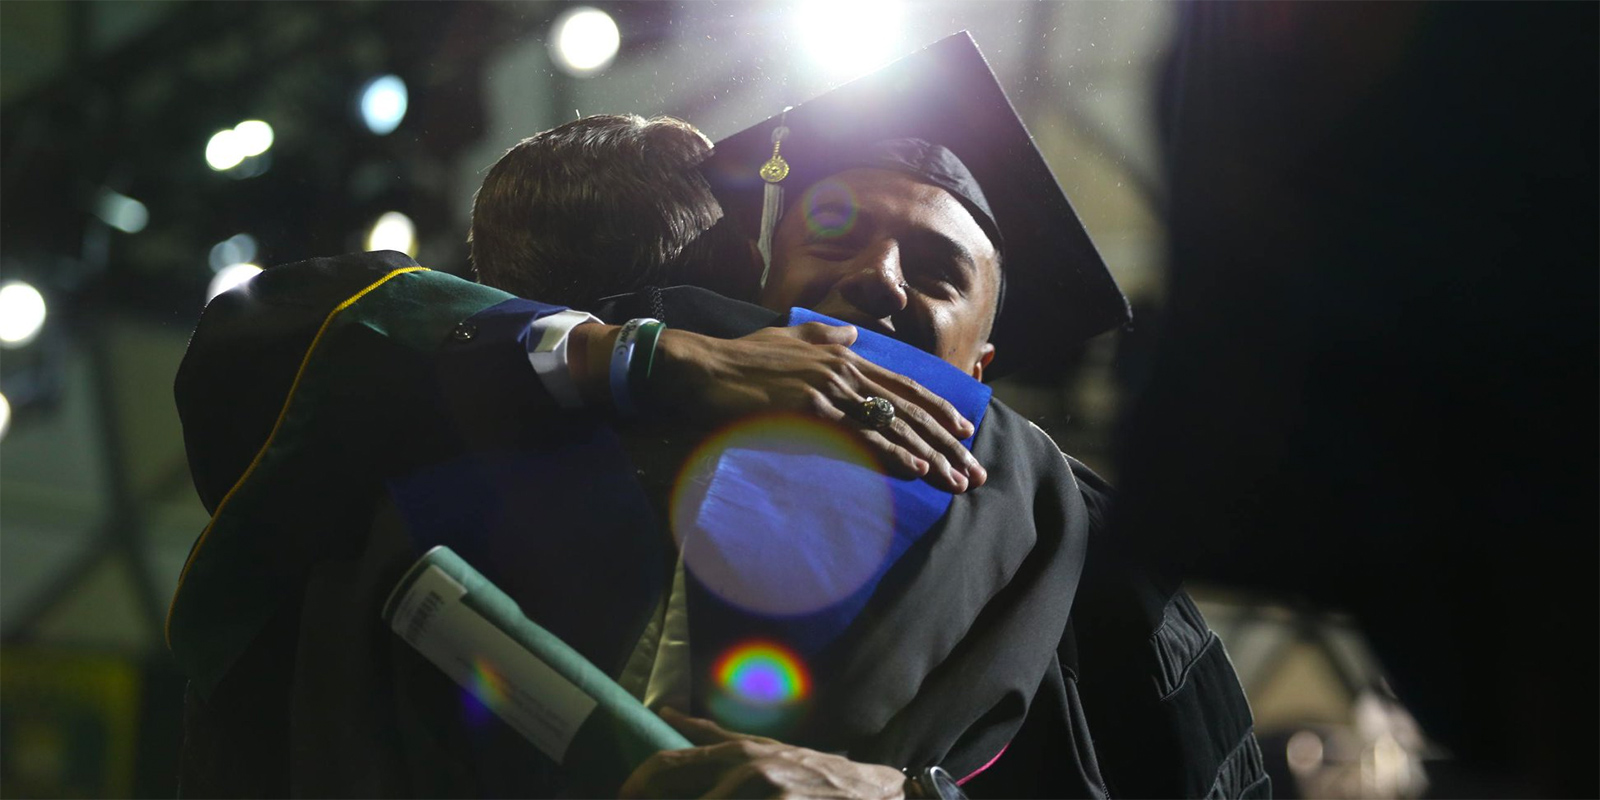 Baylor graduate hugging a friend during Commencement